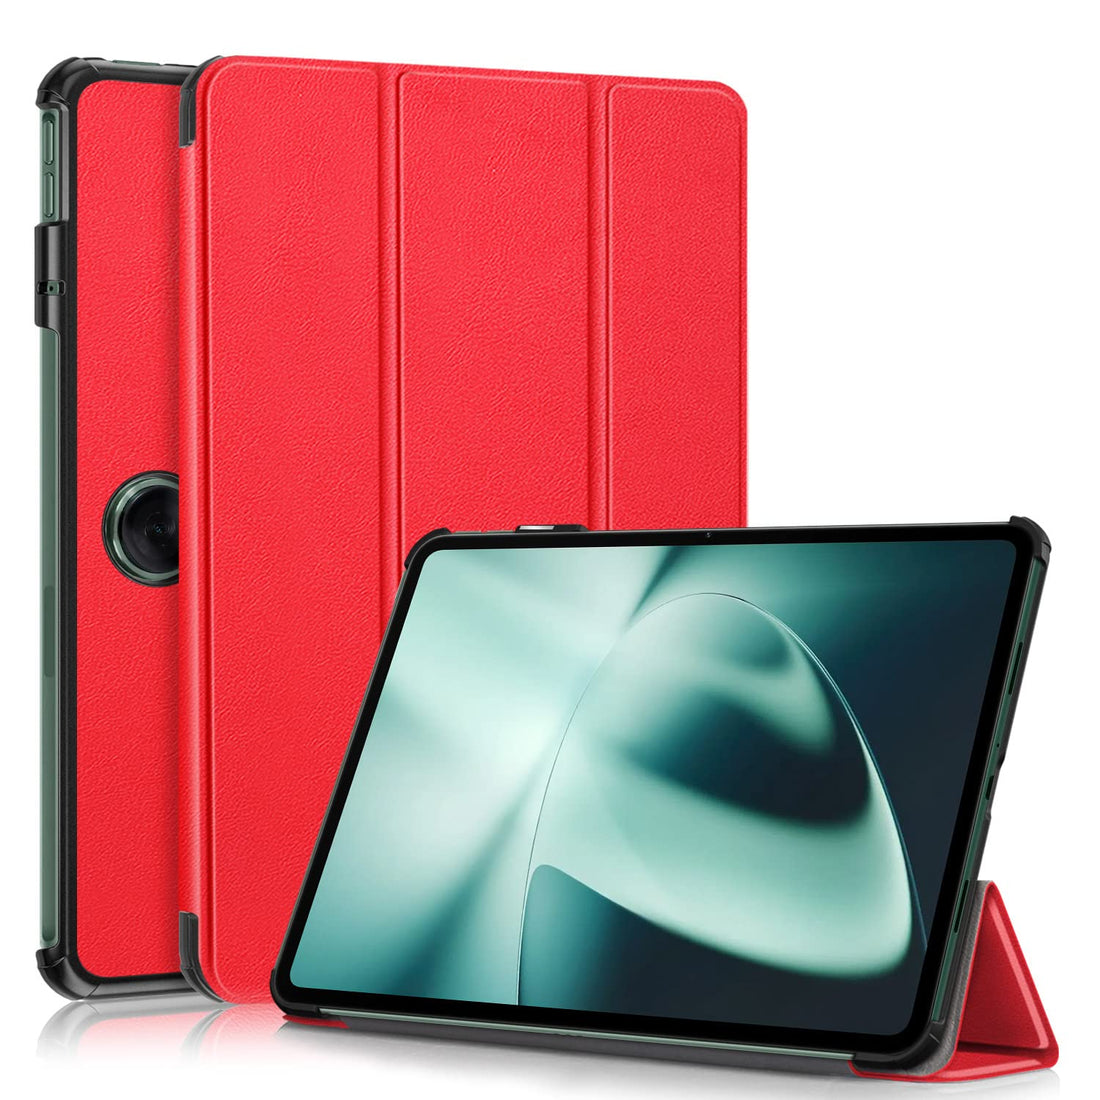 Gylint Case for OnePlus Pad 2023, Folding Folio Ultra-Thin PU Leather Stand Case Cover for OnePlus Pad/Oppo Pad 2 Red